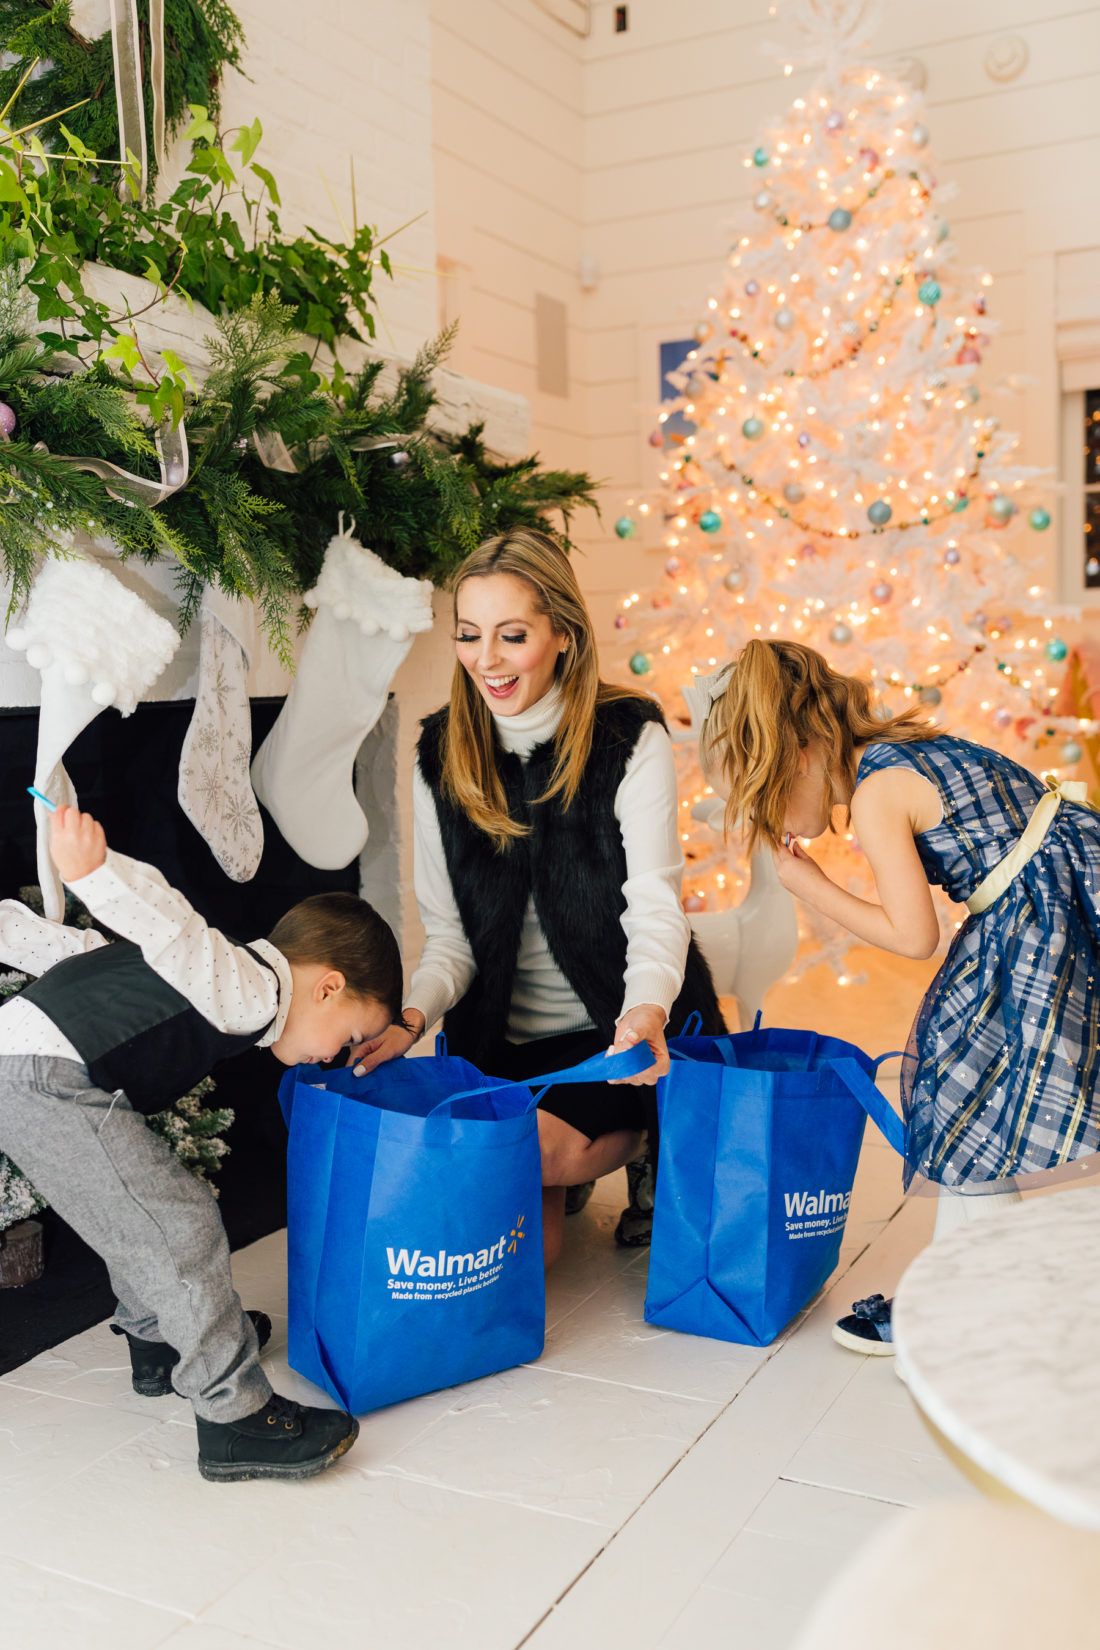 Eva Amurri unboxes products purchased at Walmart